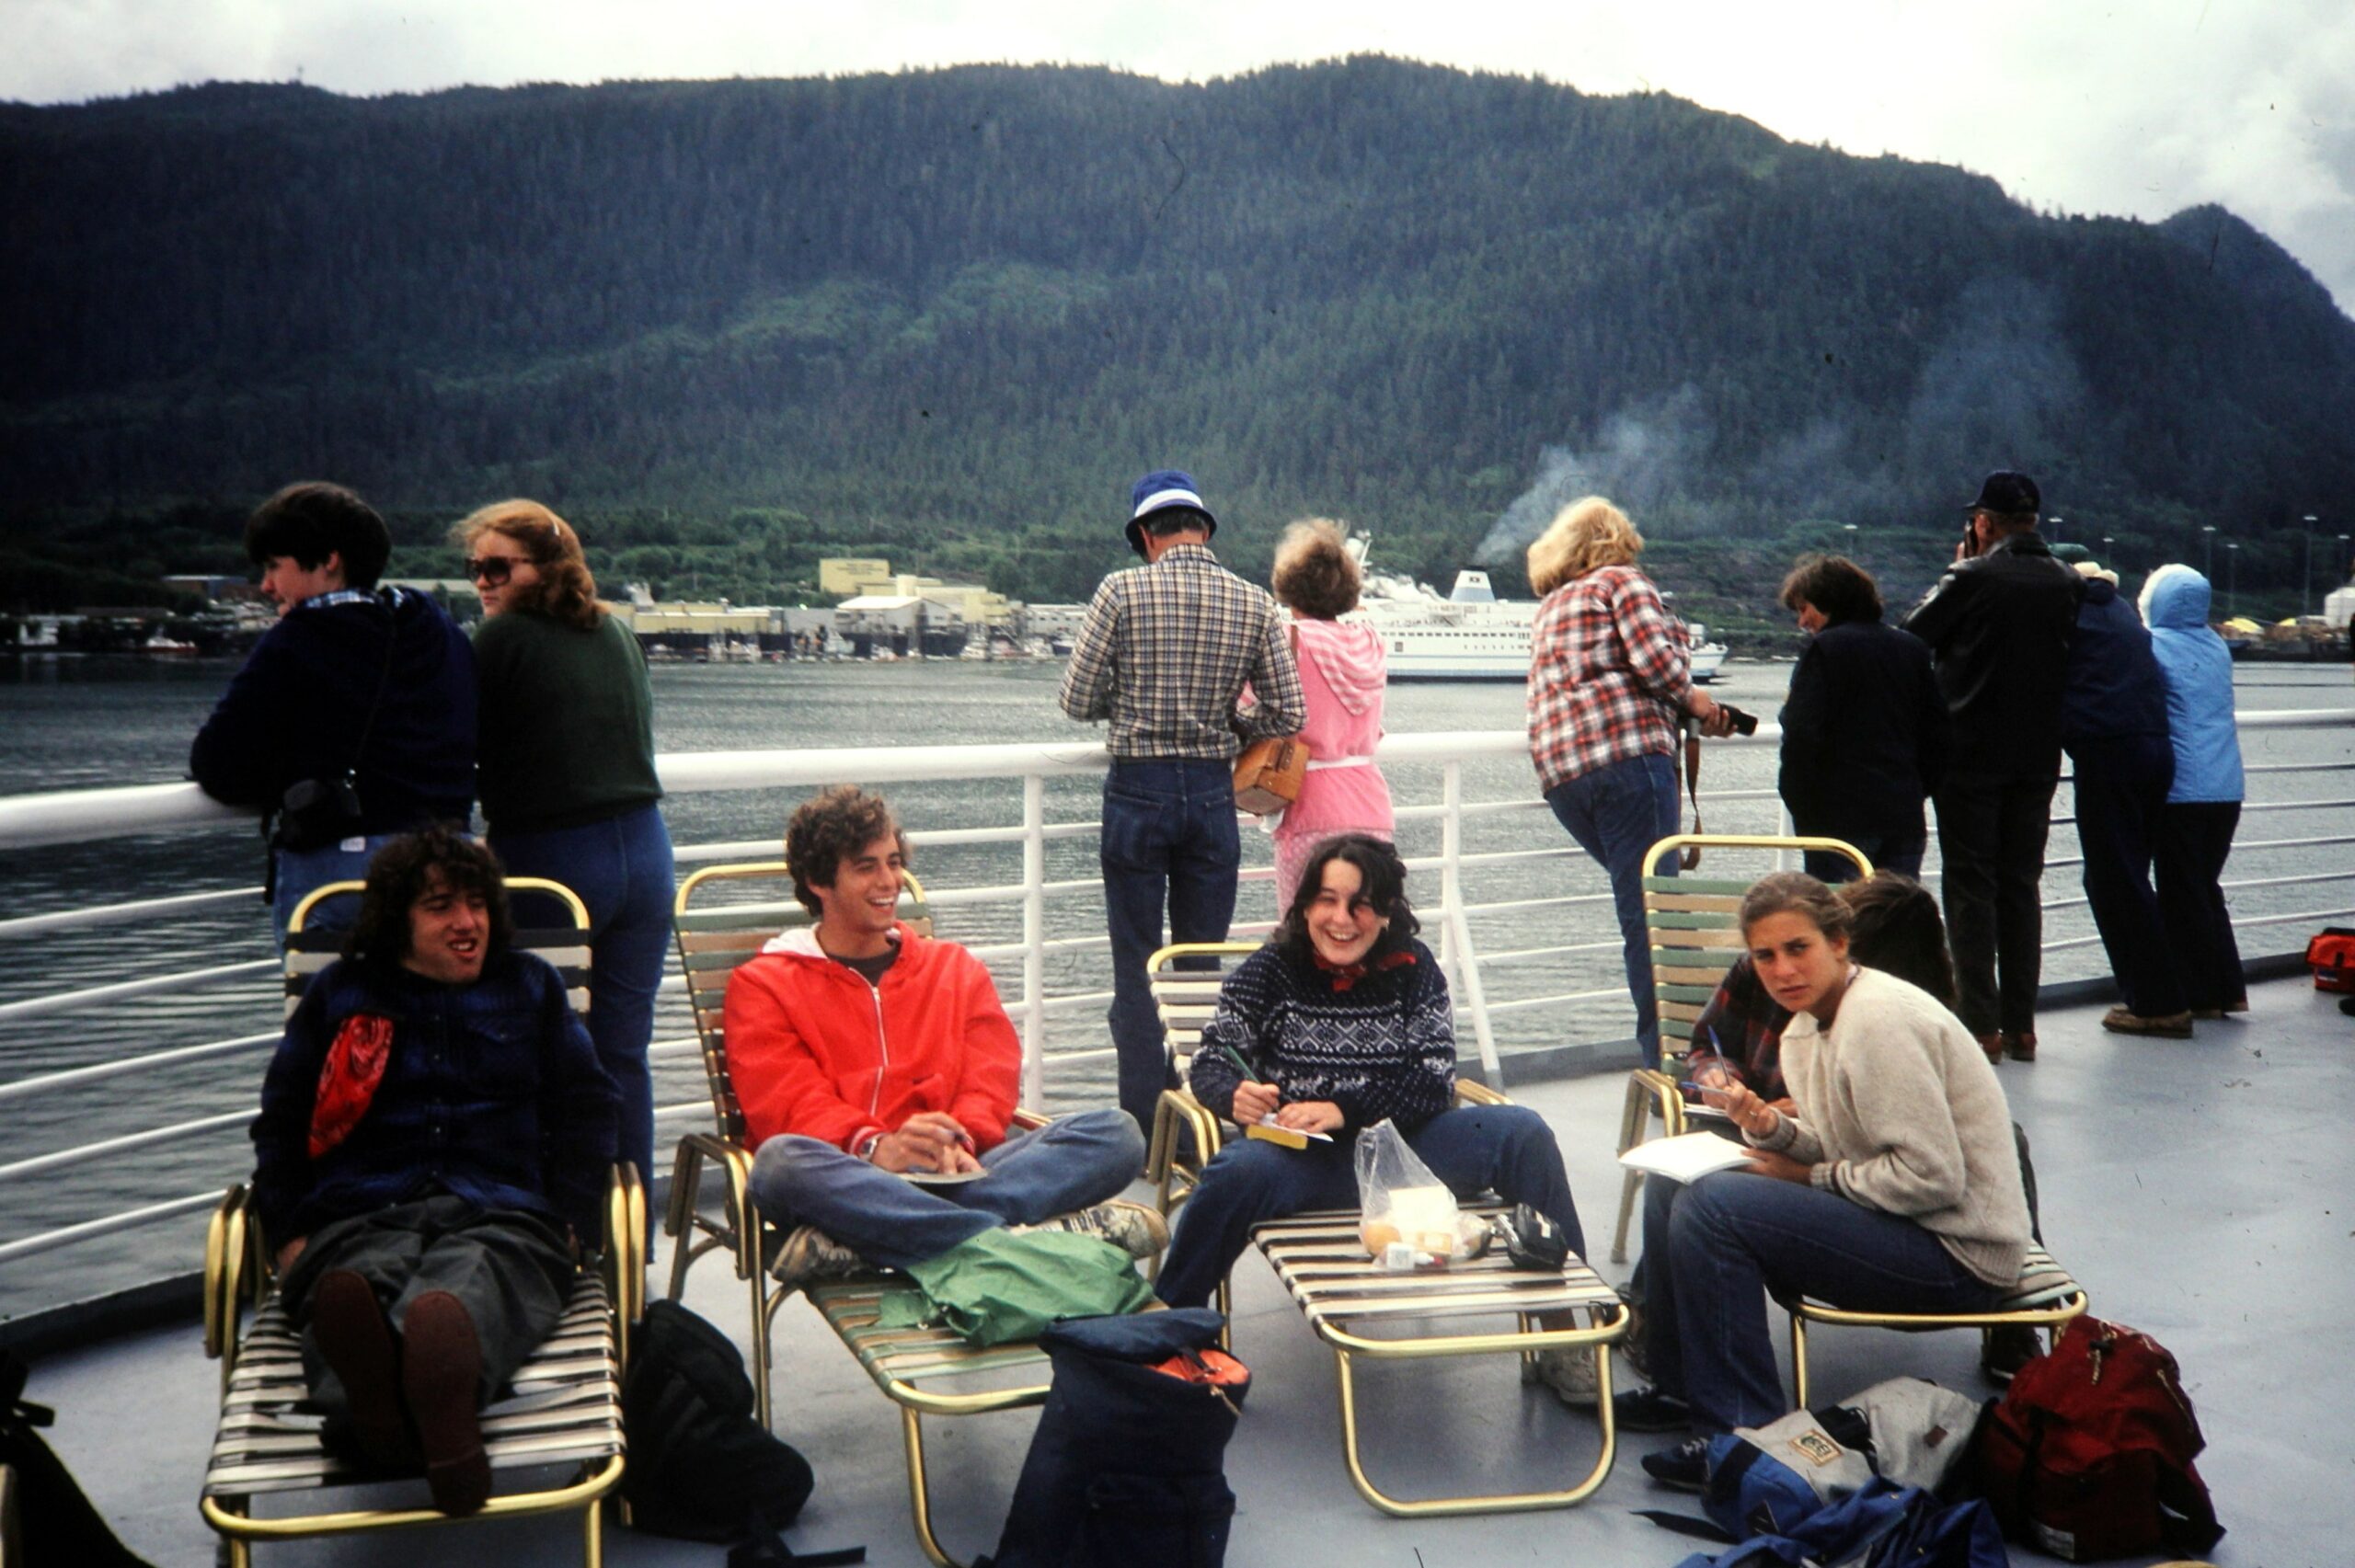 1981 Hanging out on a boat